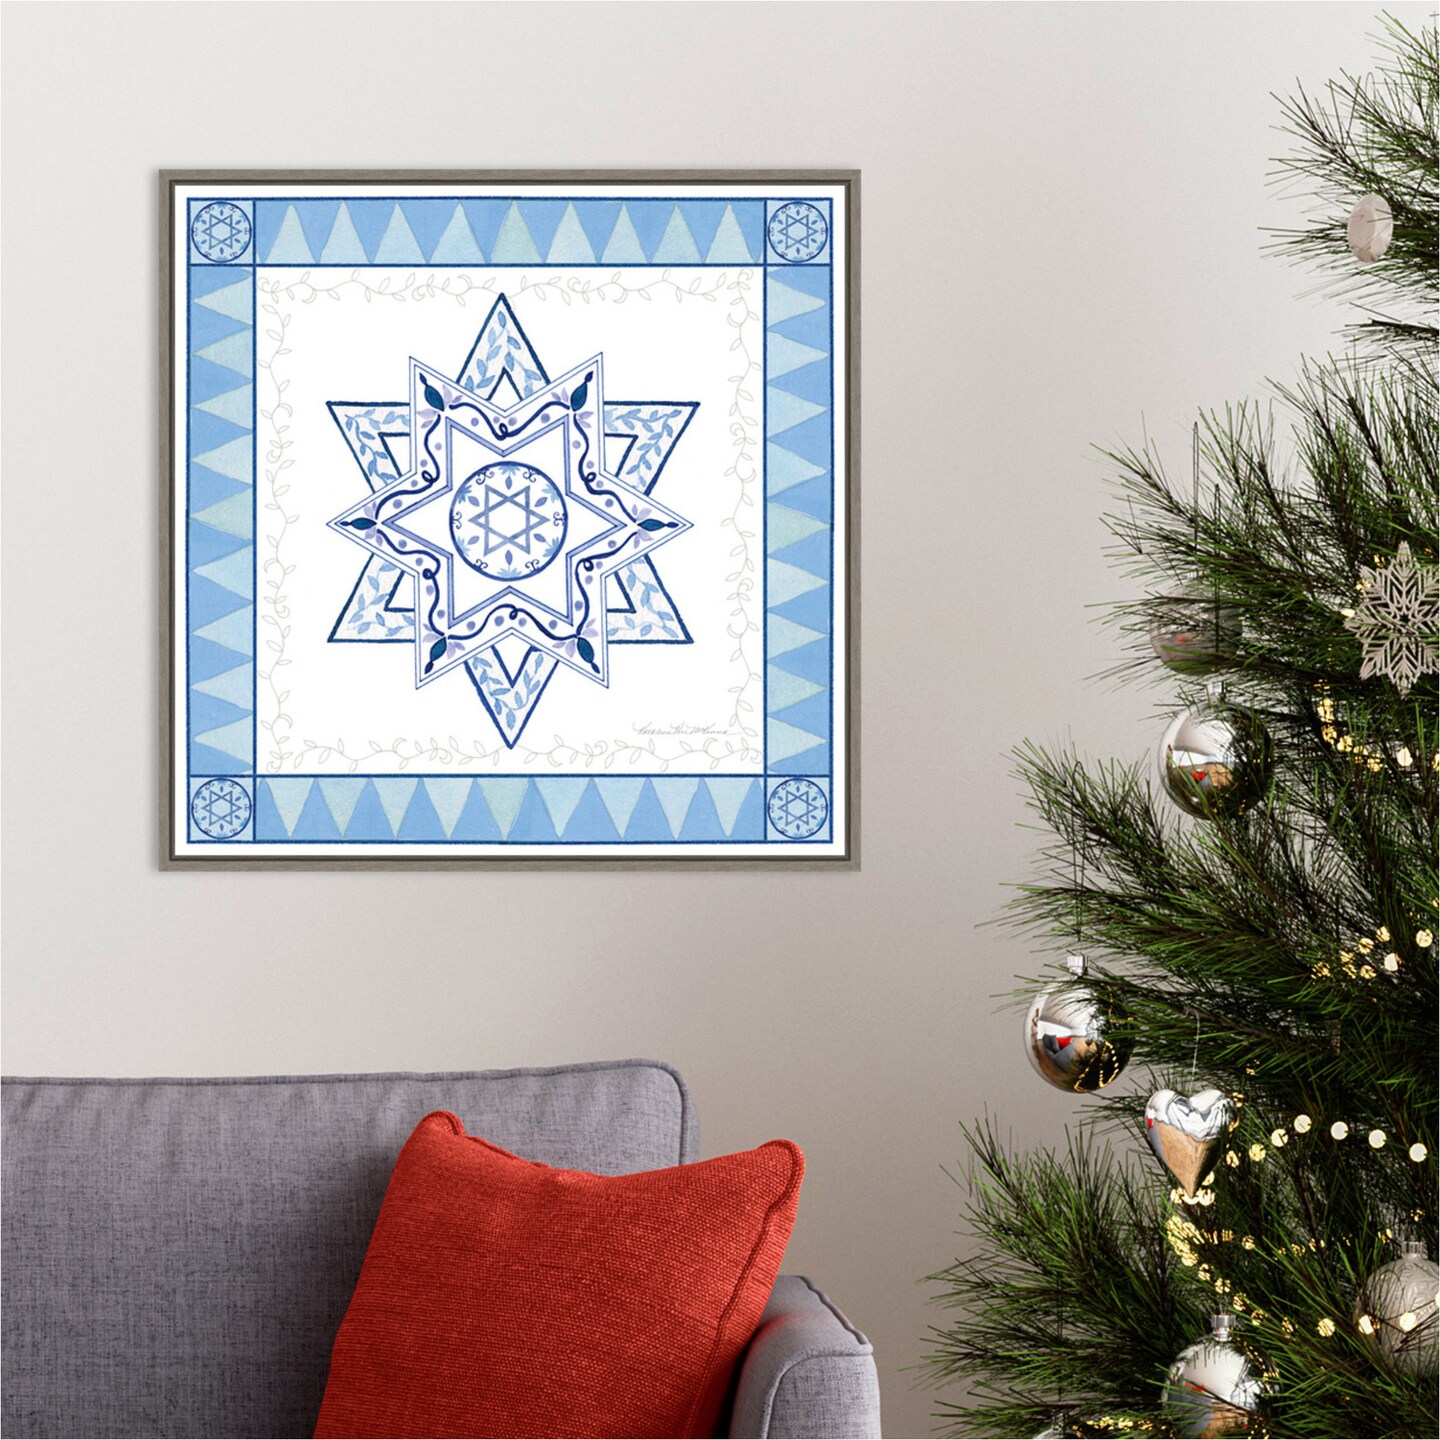 Celebrating Hanukkah I by Kathleen Parr McKenna 22-in. W x 22-in. H. Canvas Wall Art Print Framed in Grey